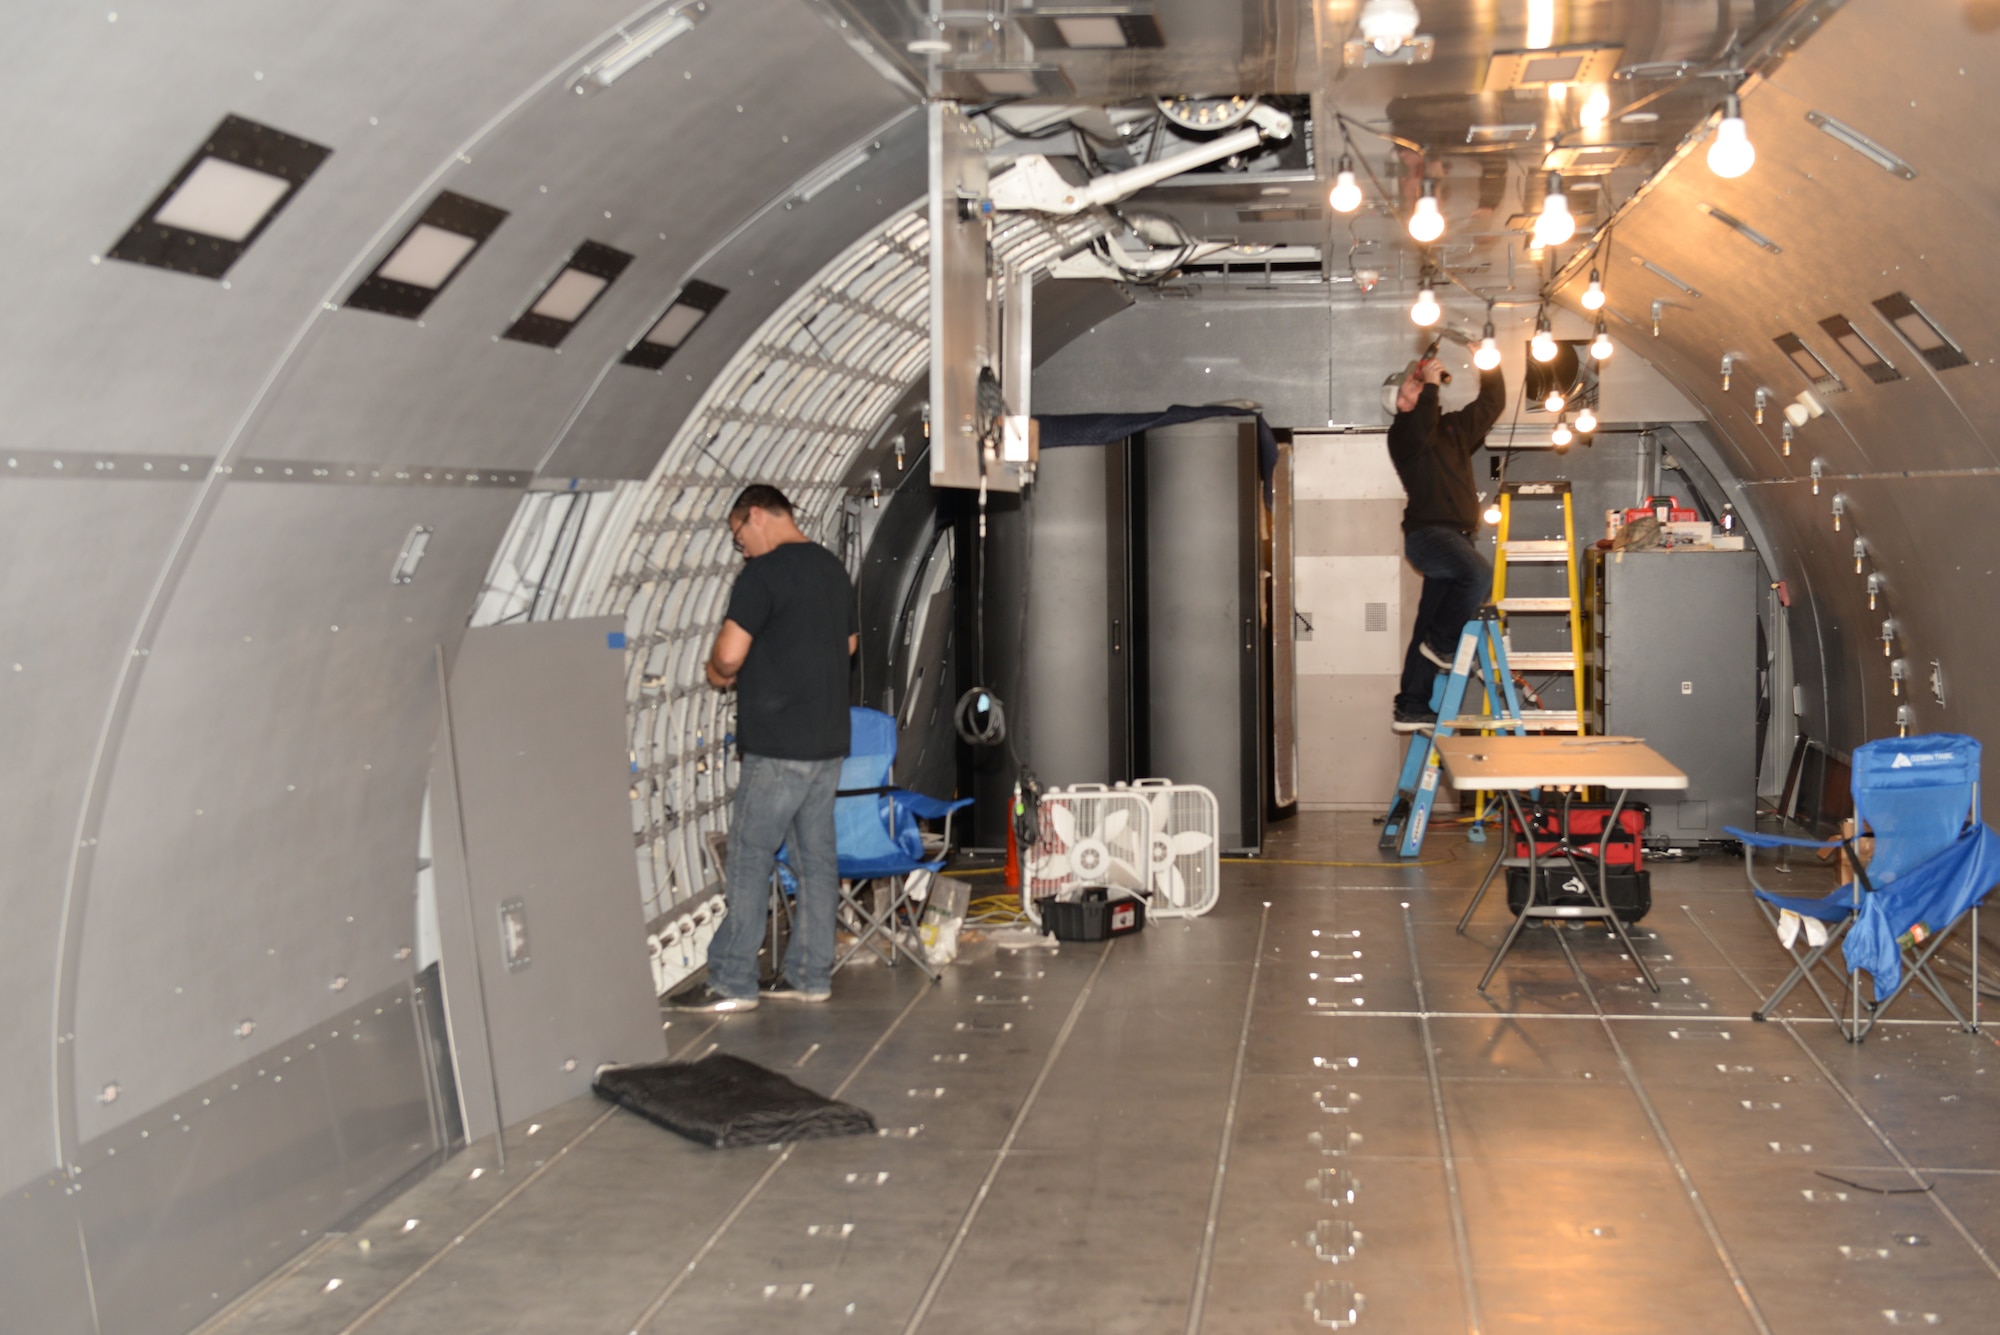 Contractors put the finishing touches on the KC-46A fuselage trainer (FuT) in preparation for the training of aircrews starting Dec. 5, Pease Air National Guard Base, N.H, Oct. 9, 2018. The FuT is used to train KC-46 boom operators on cargo handling, aircraft maintainers on proper procedures and pilots on egress. (Photo by Master Sgt. Thomas Johnson, 157th ARW Public Affairs)